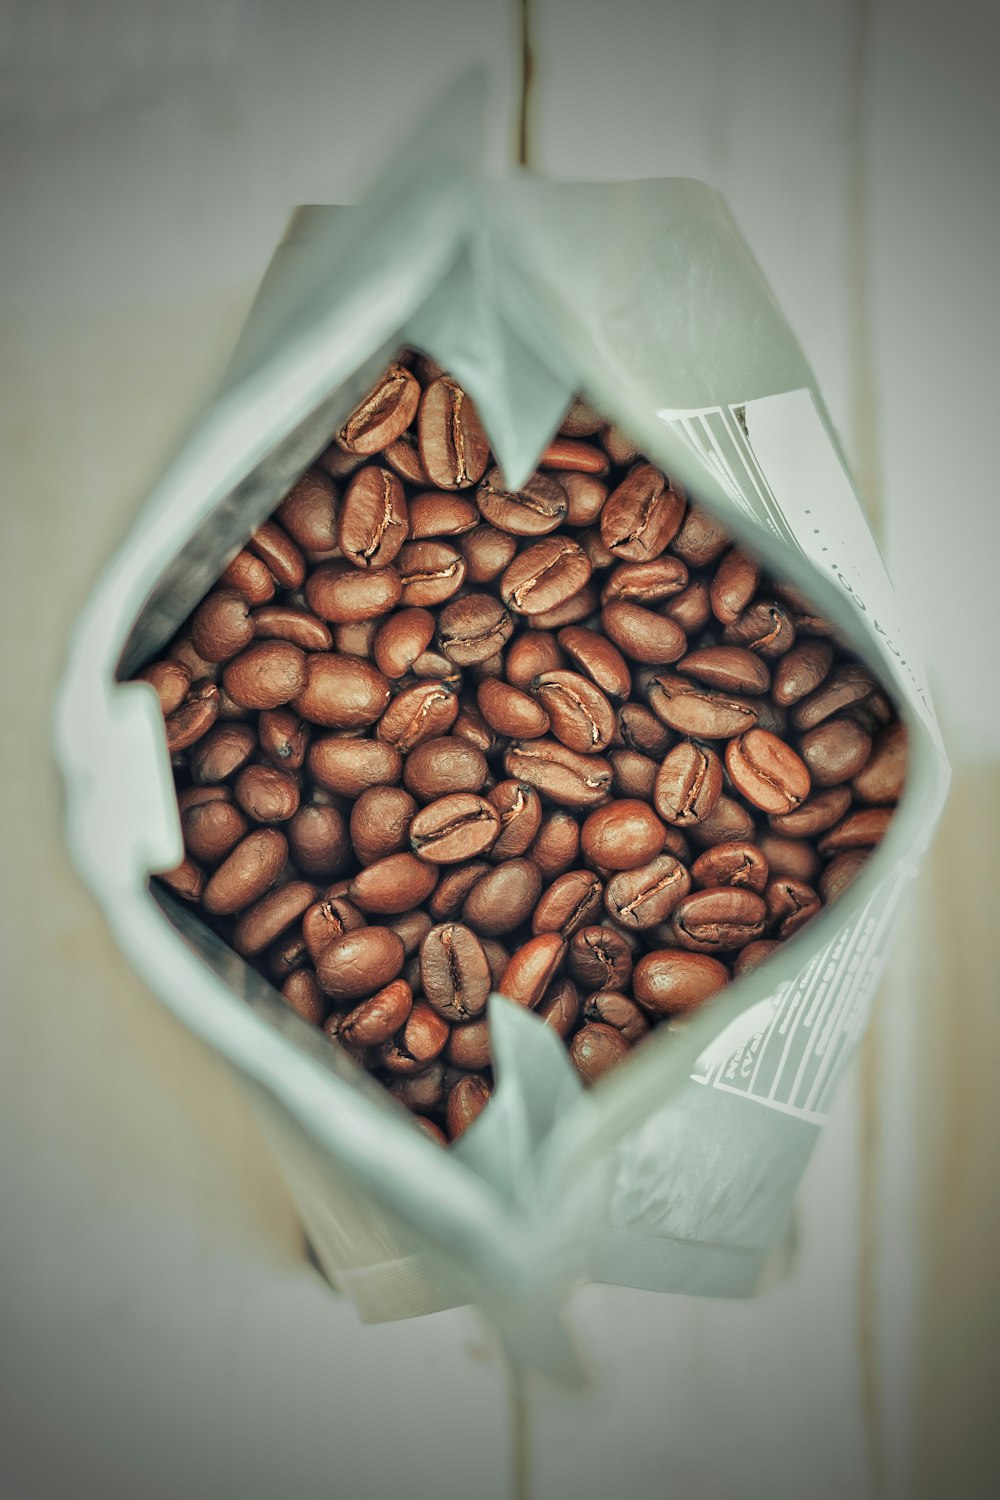 a bag full of coffee beans sitting on a table